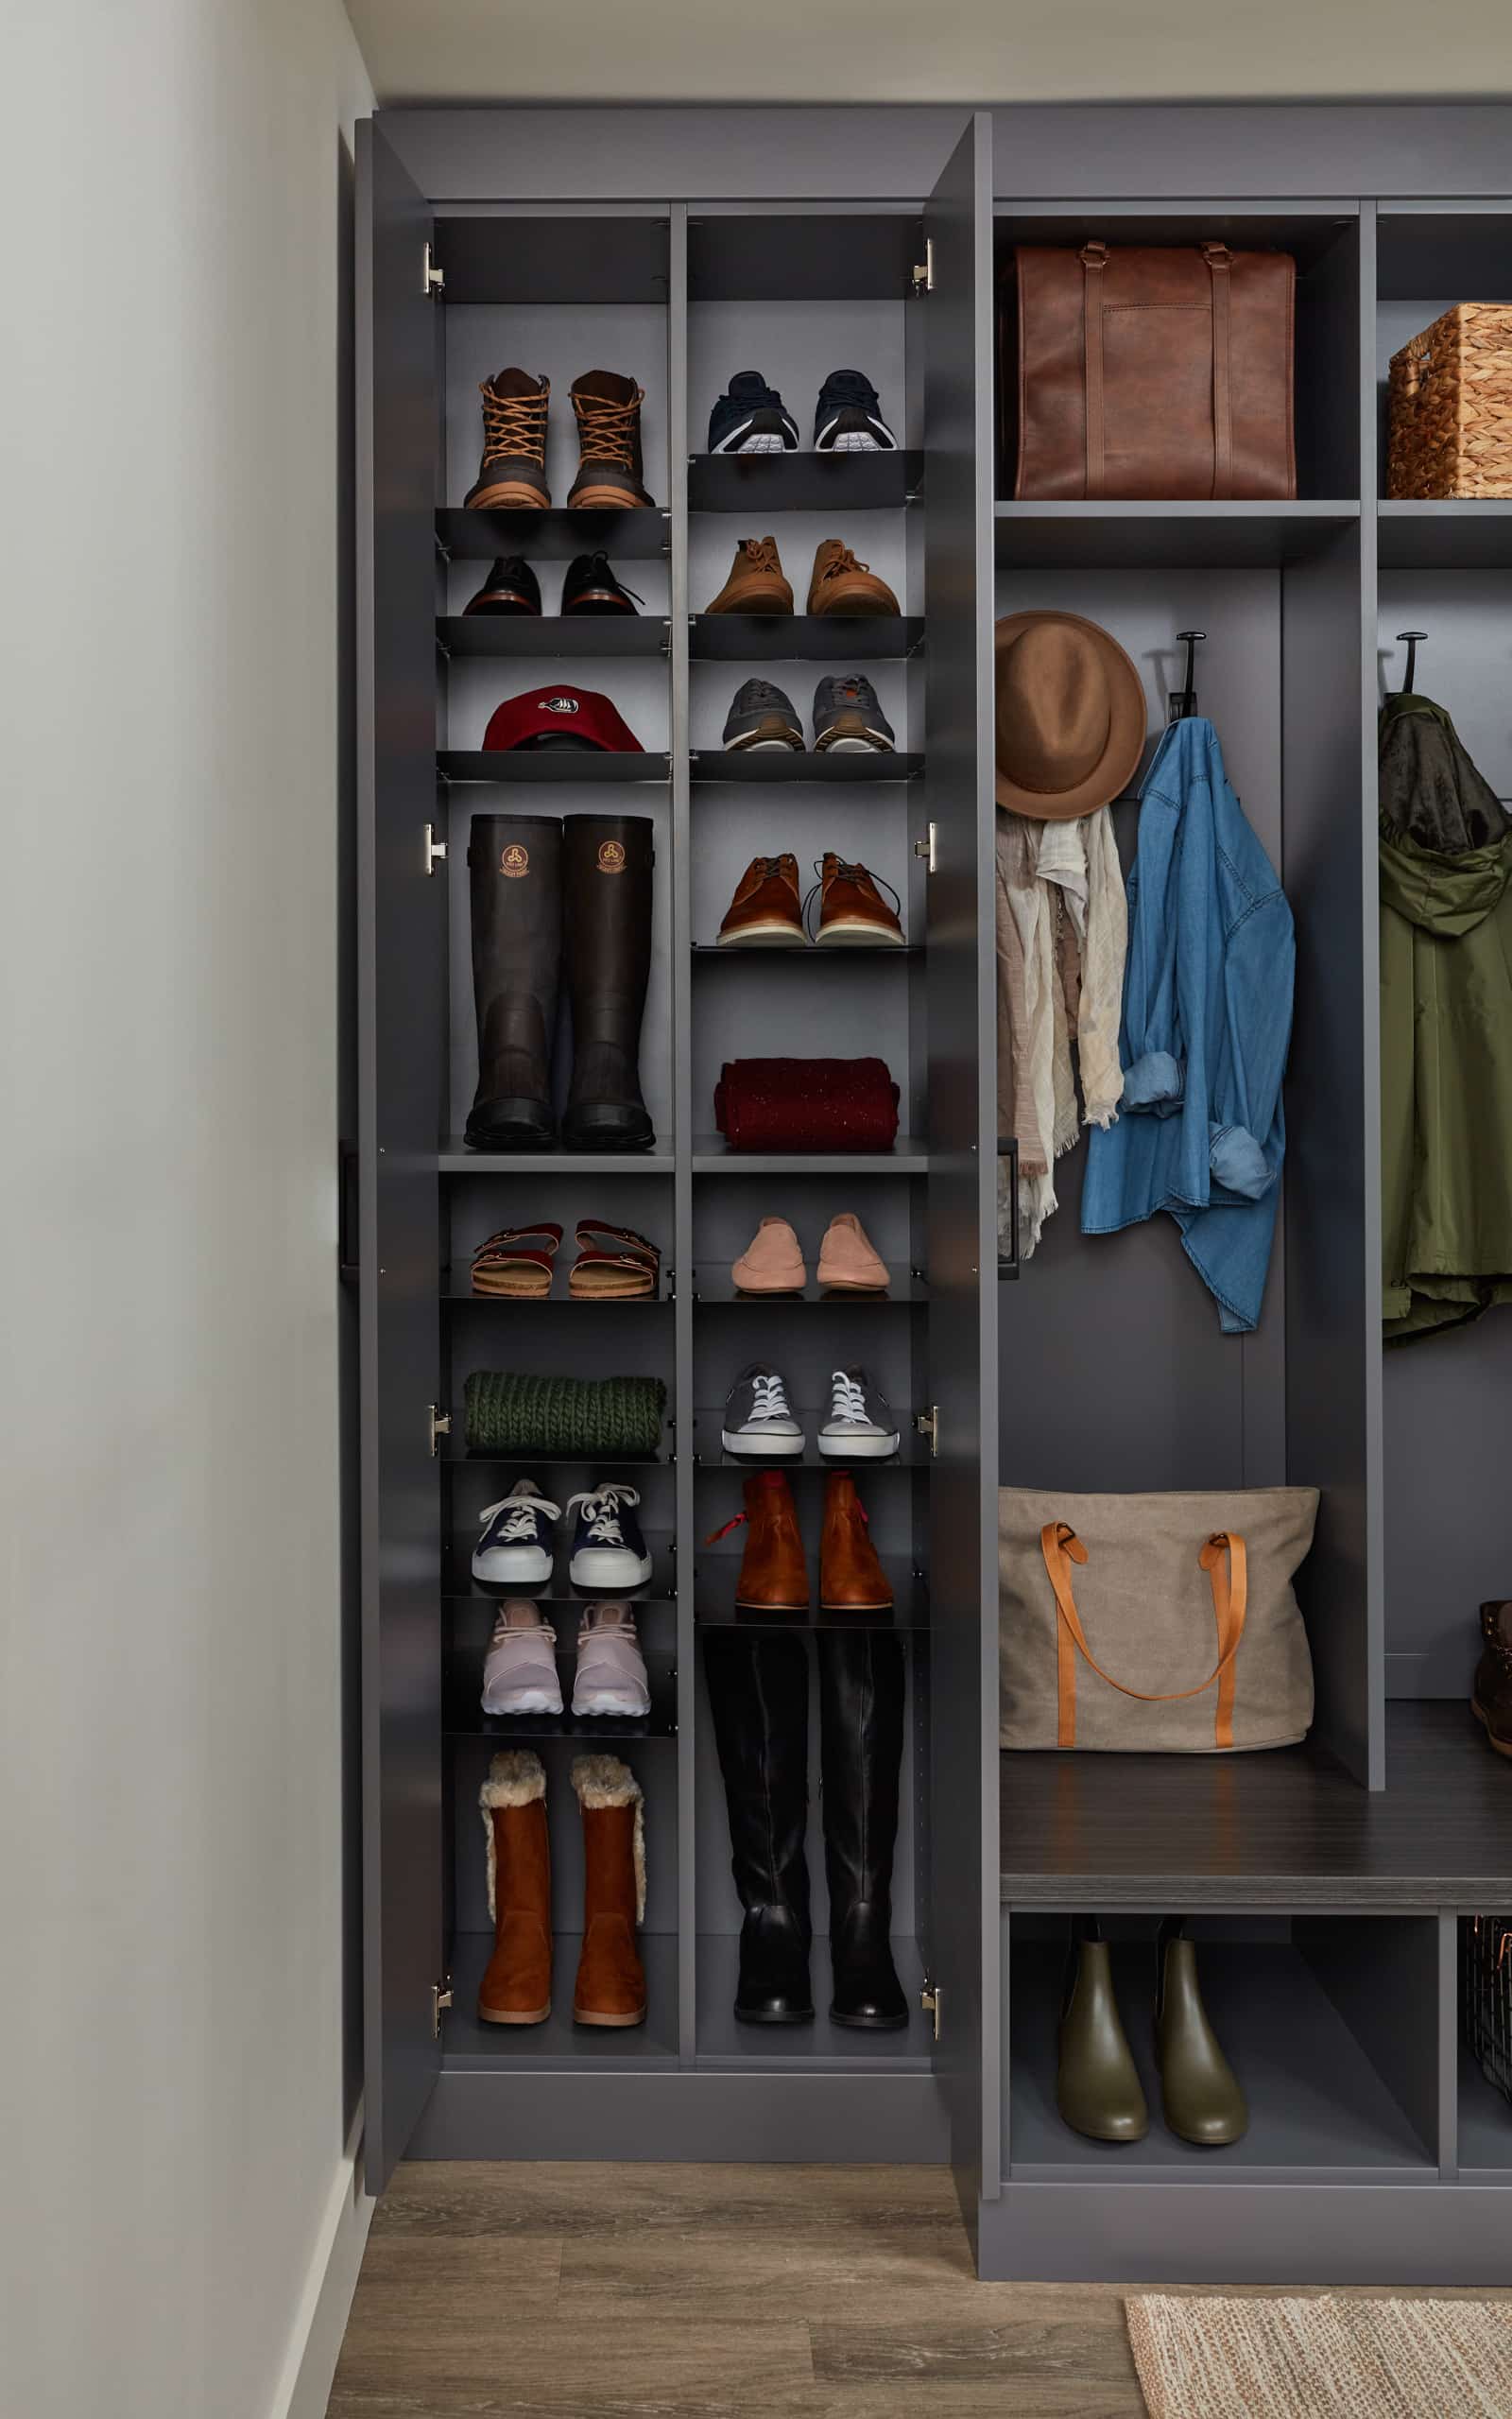 Closet showing items on hooks and shelves